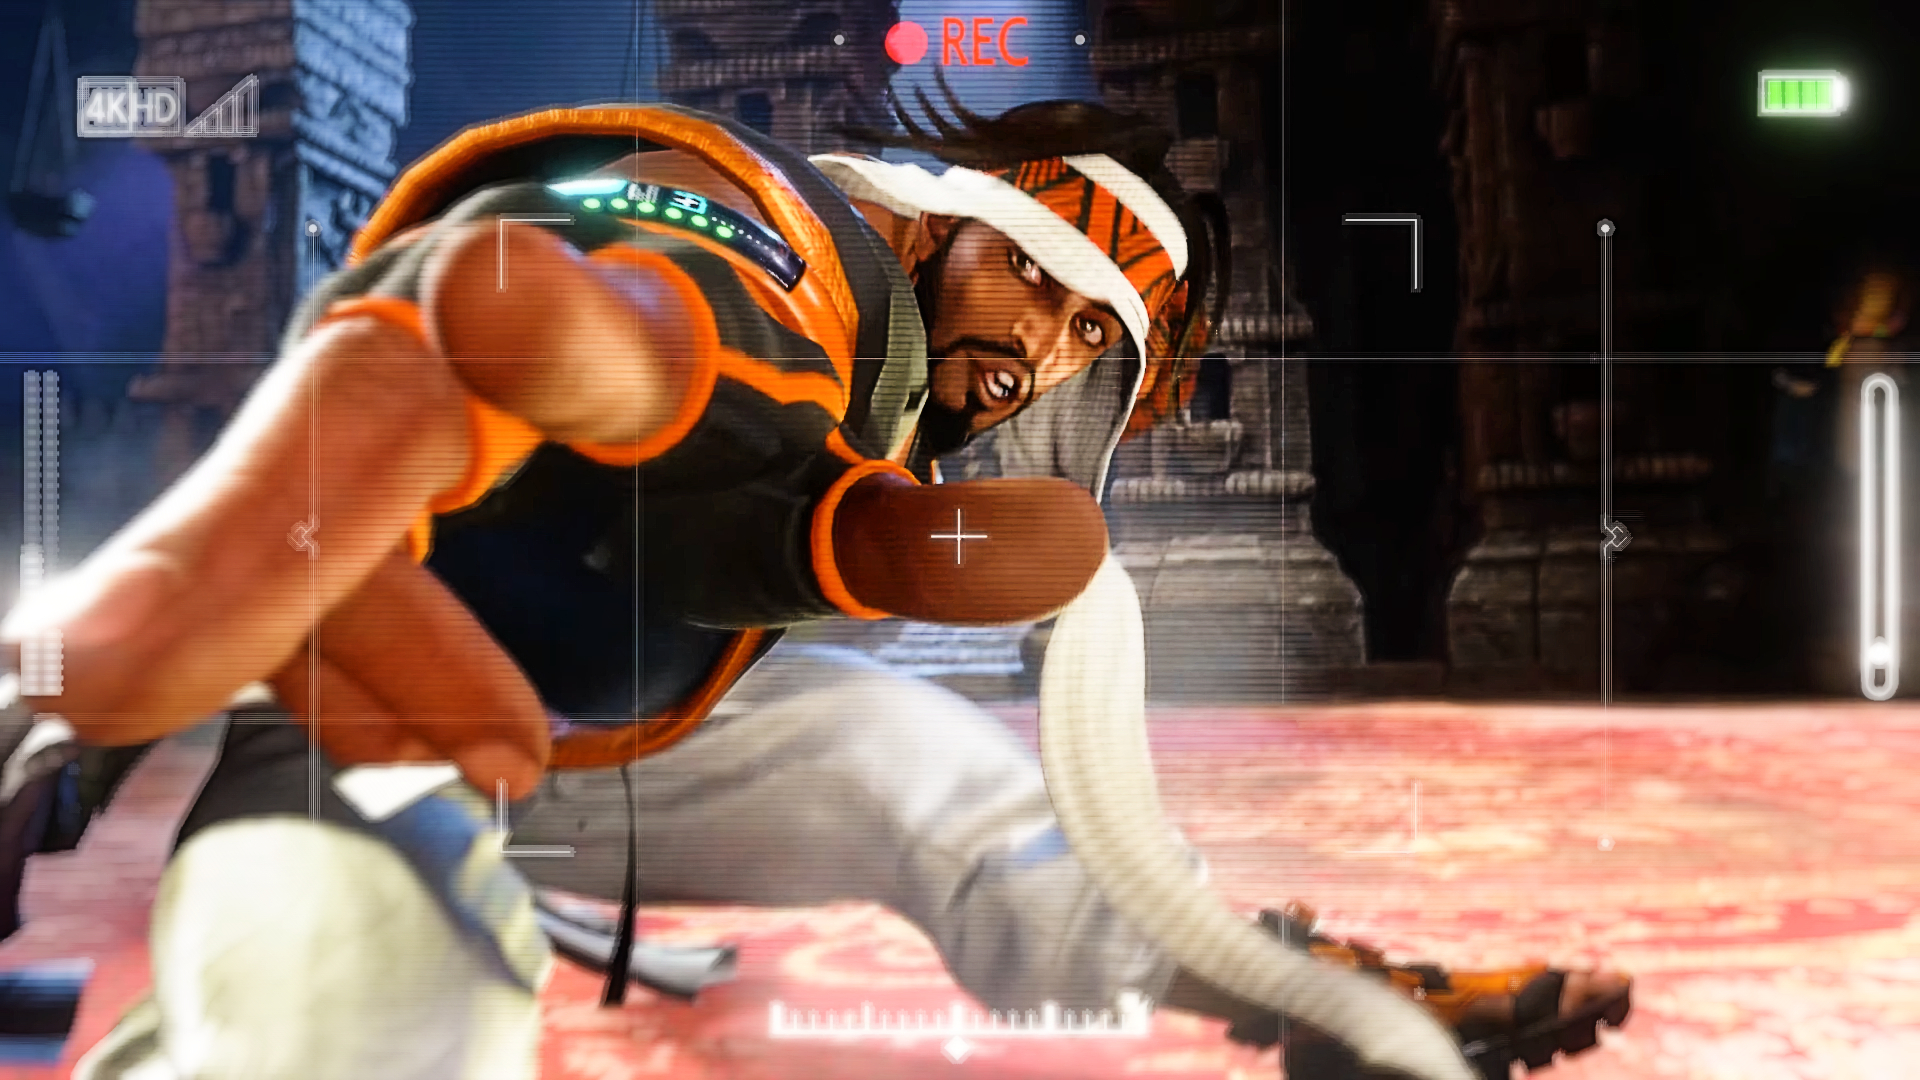 Street Fighter 6's first additional character Rashid is implemented  today! Campaign to win not-for-sale goods is also underway! - Saiga NAK